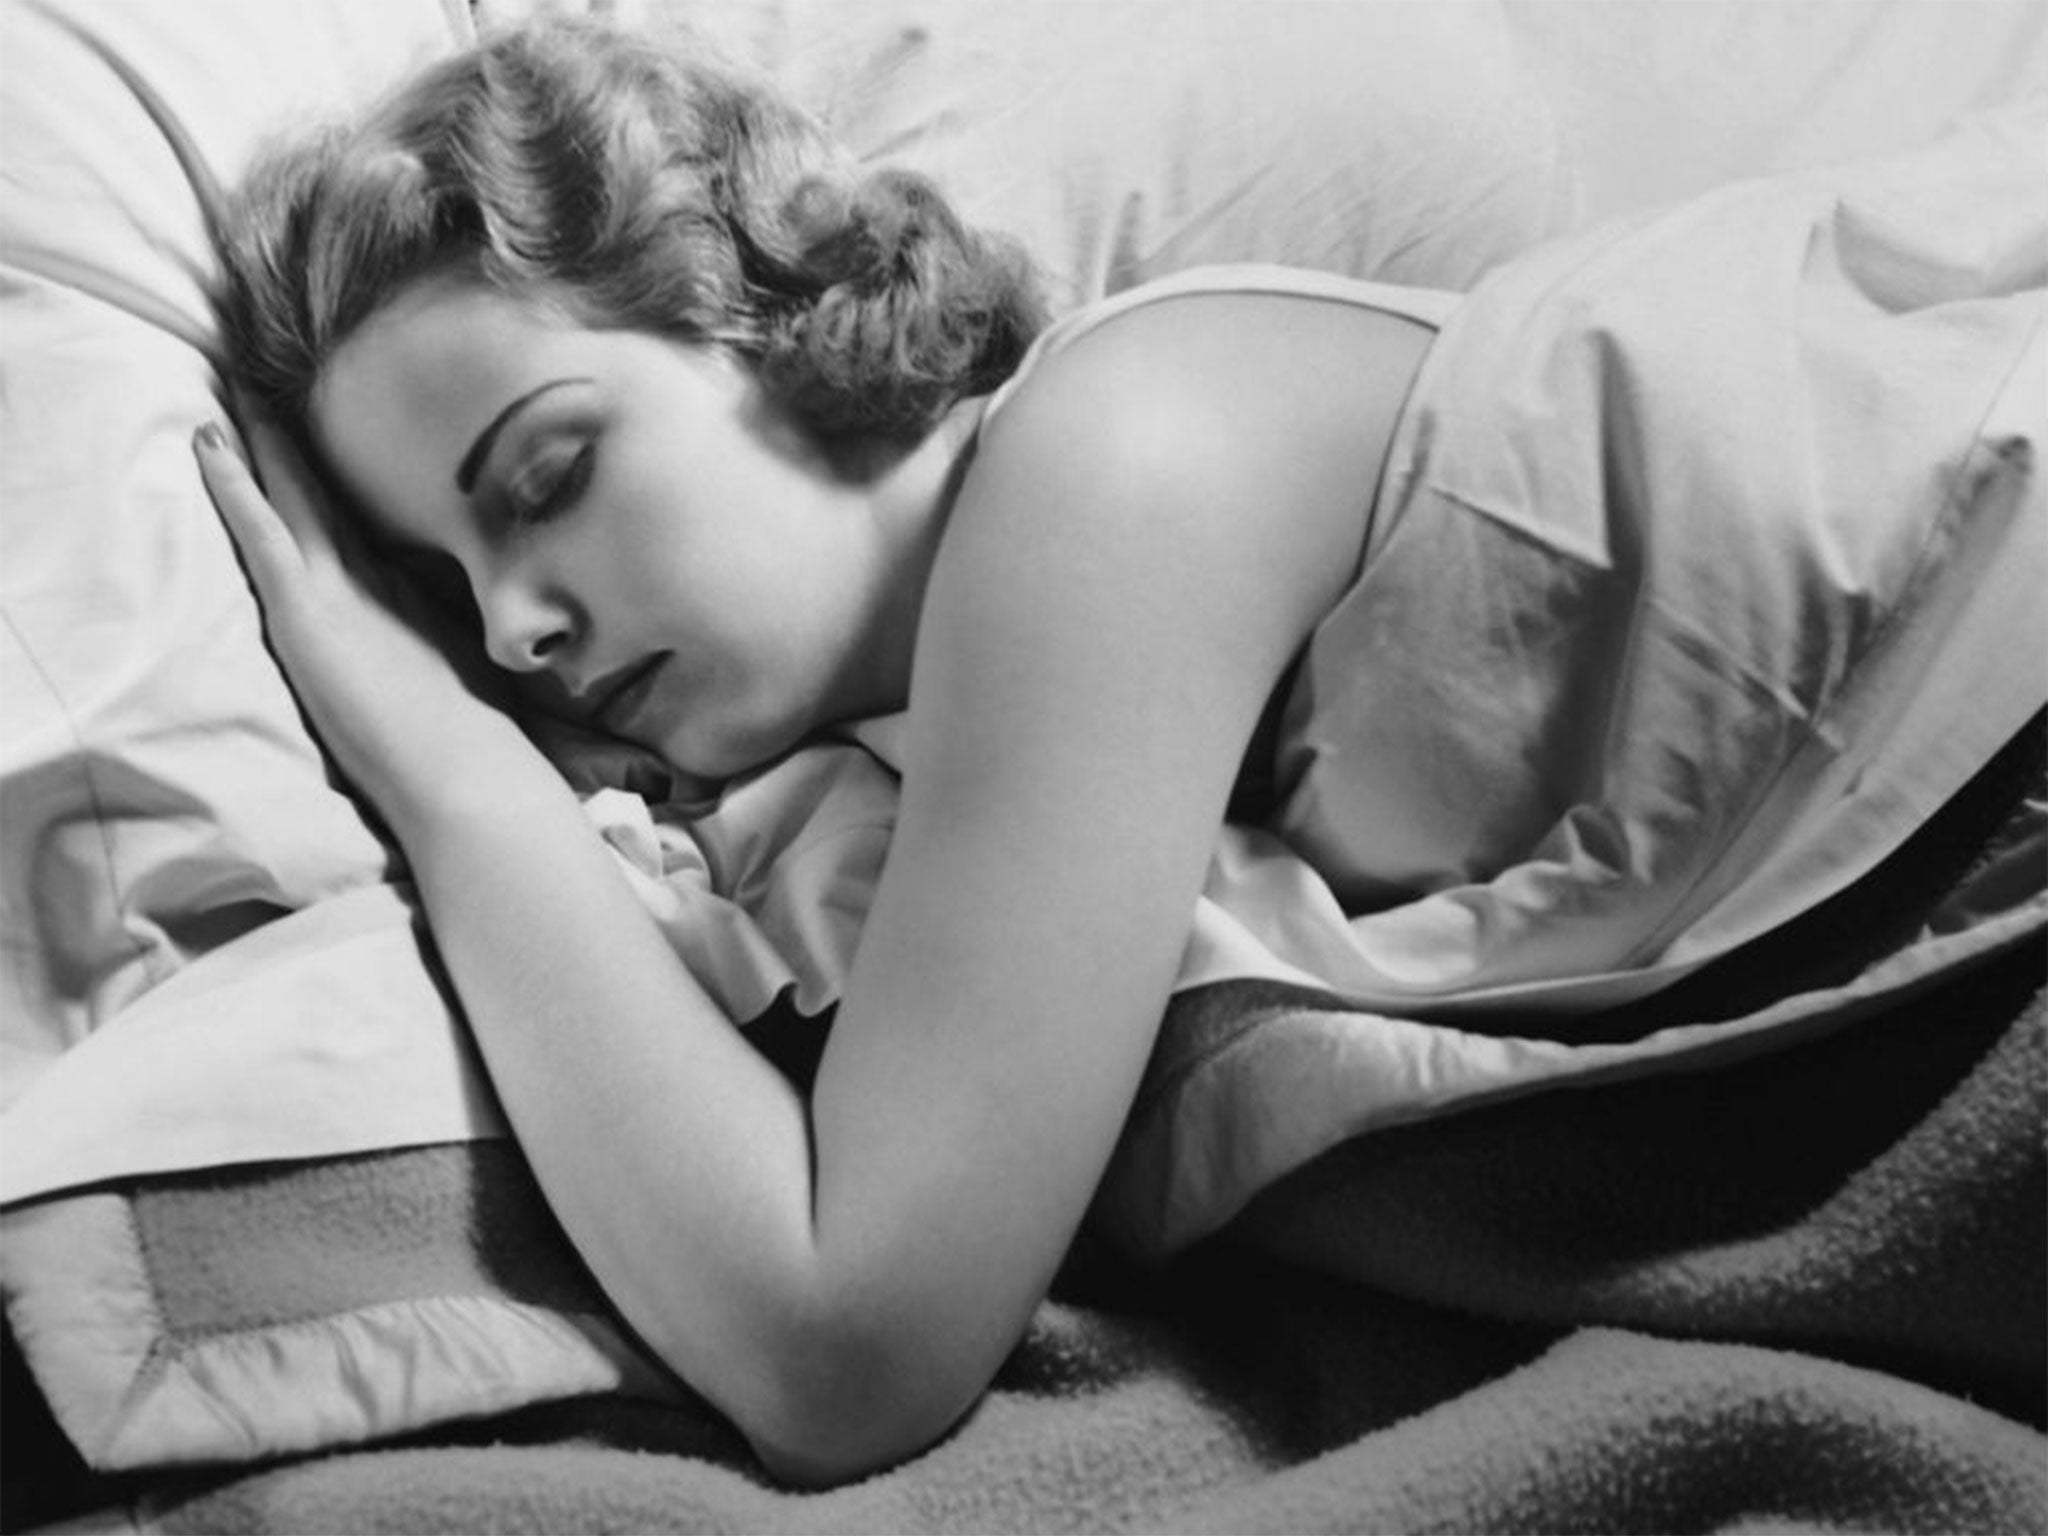 Could too much sleep kill you? Research suggests it could